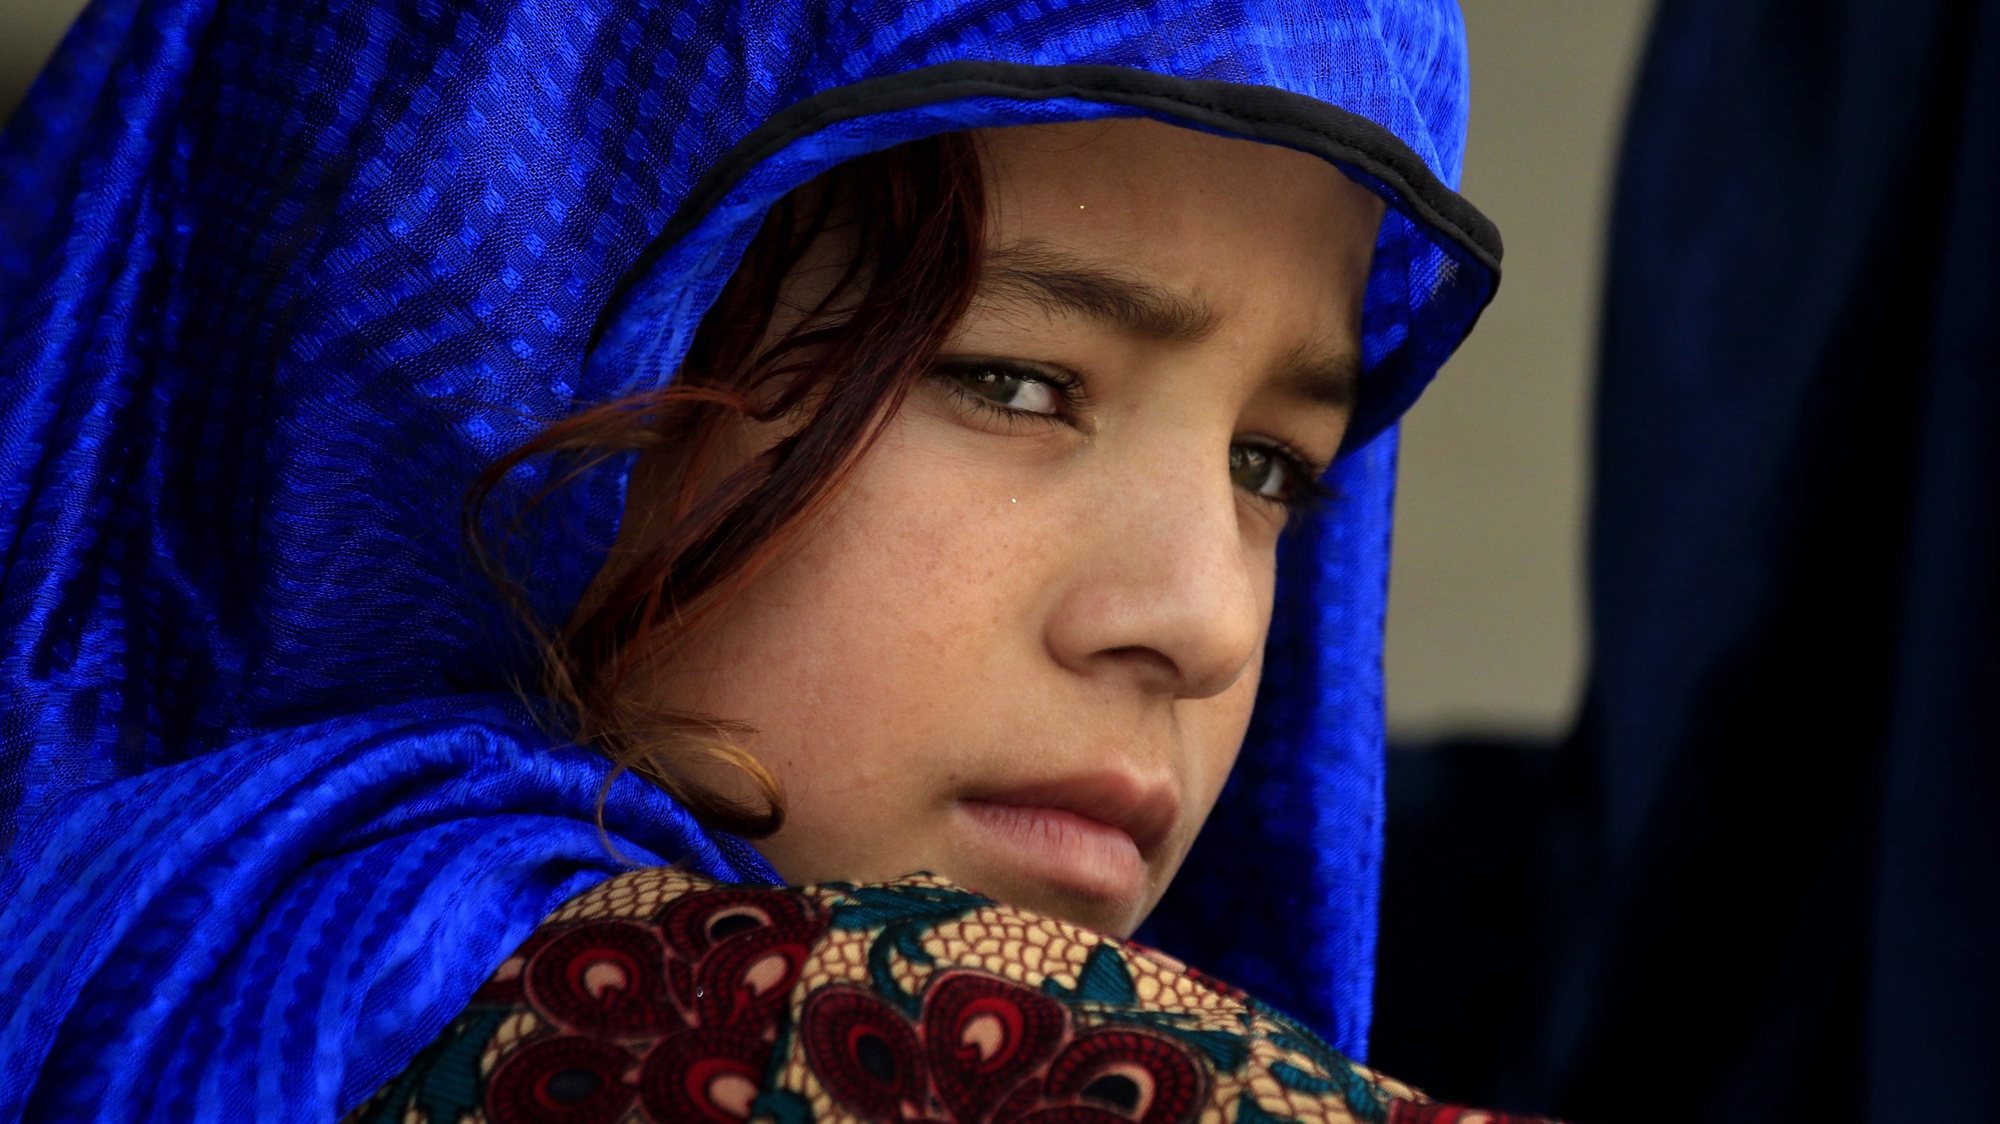 epa07005516 Afghan refugee girl waits to get registered at a United Nation High Commissioner for Refugees (UNHCR) registration center in Azakhel area of Nowshera, Khyber Pakhtunkhwa province, Pakistan, 08 September 2018. Pakistan that hosts more than 1.5 million Afghan refugees has repatriated more than one hundred thousands refugees back to their country under an UNHCR voluntarily return program in the last two years. Others are not identified.  EPA/BILAWAL ARBAB